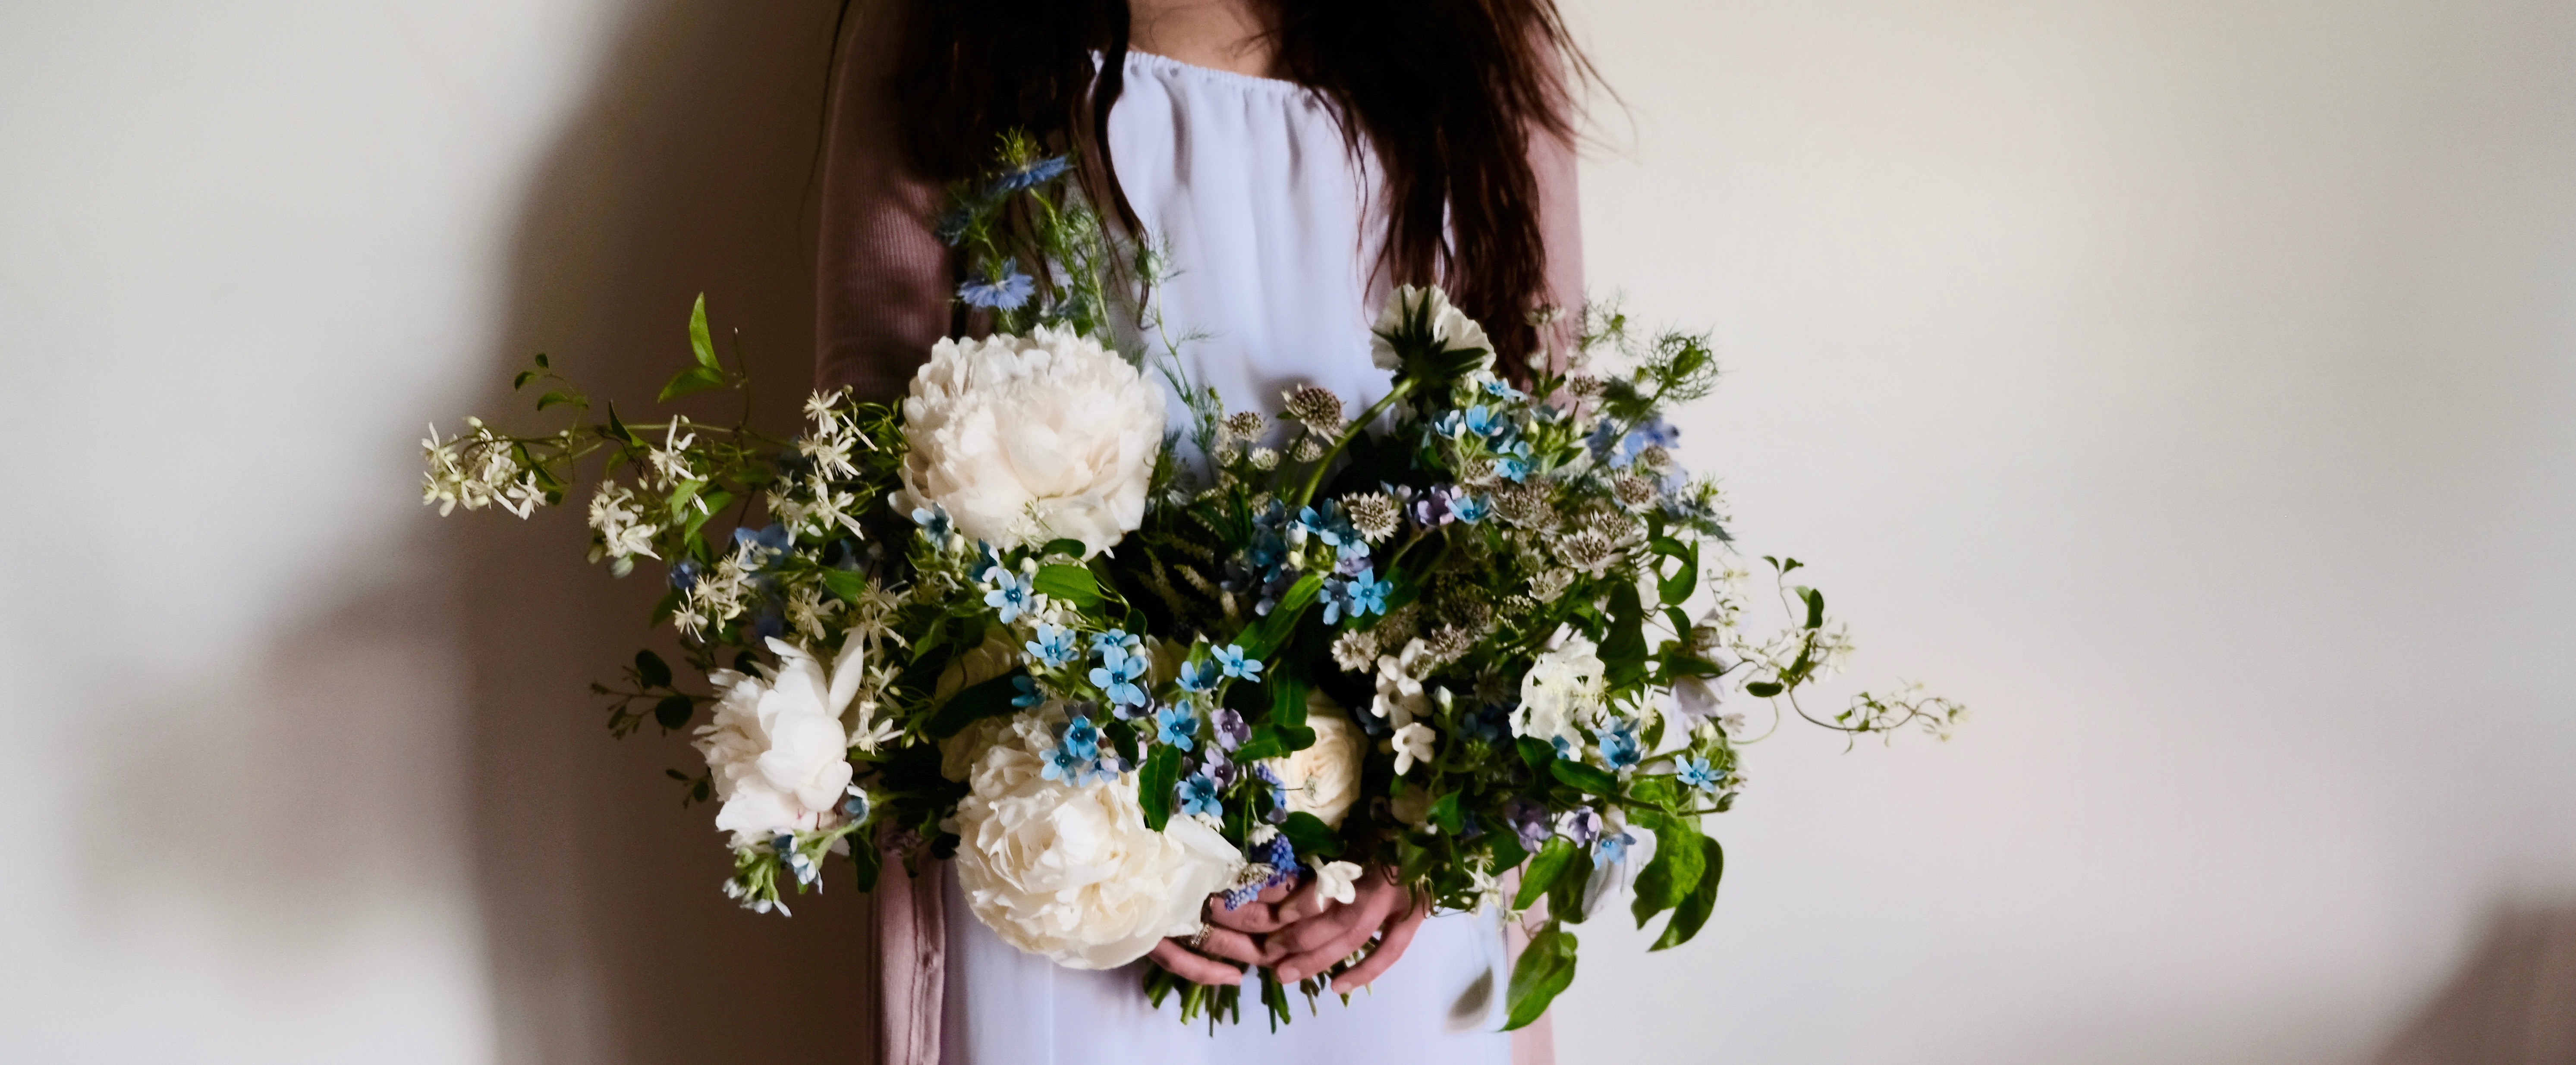 Bouquet with blue flowers